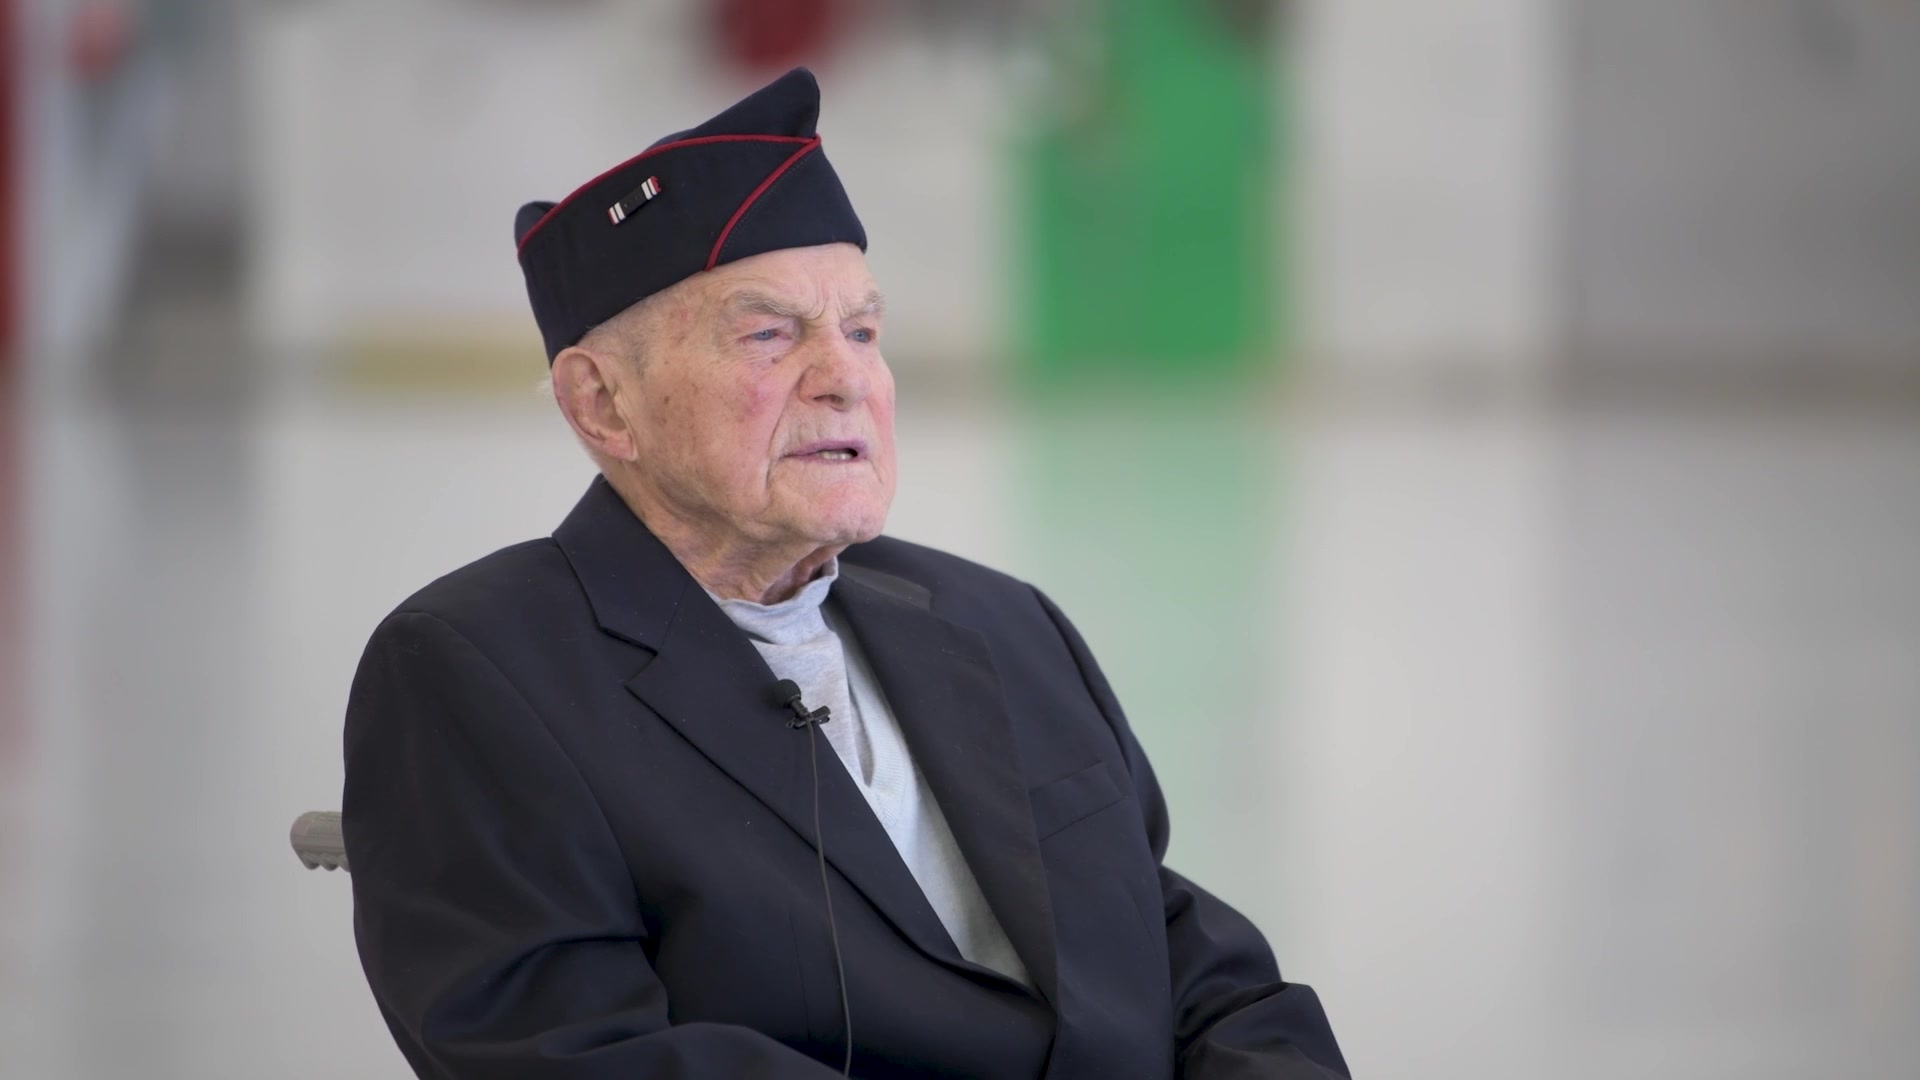 A World War II veteran who was a POW in the Pacific theater, receives the Combat Infantry Badge, sergeant stripes, and the POW Medal 76 years later.

Video by Air Force SSgt. Brycen Guerrero.